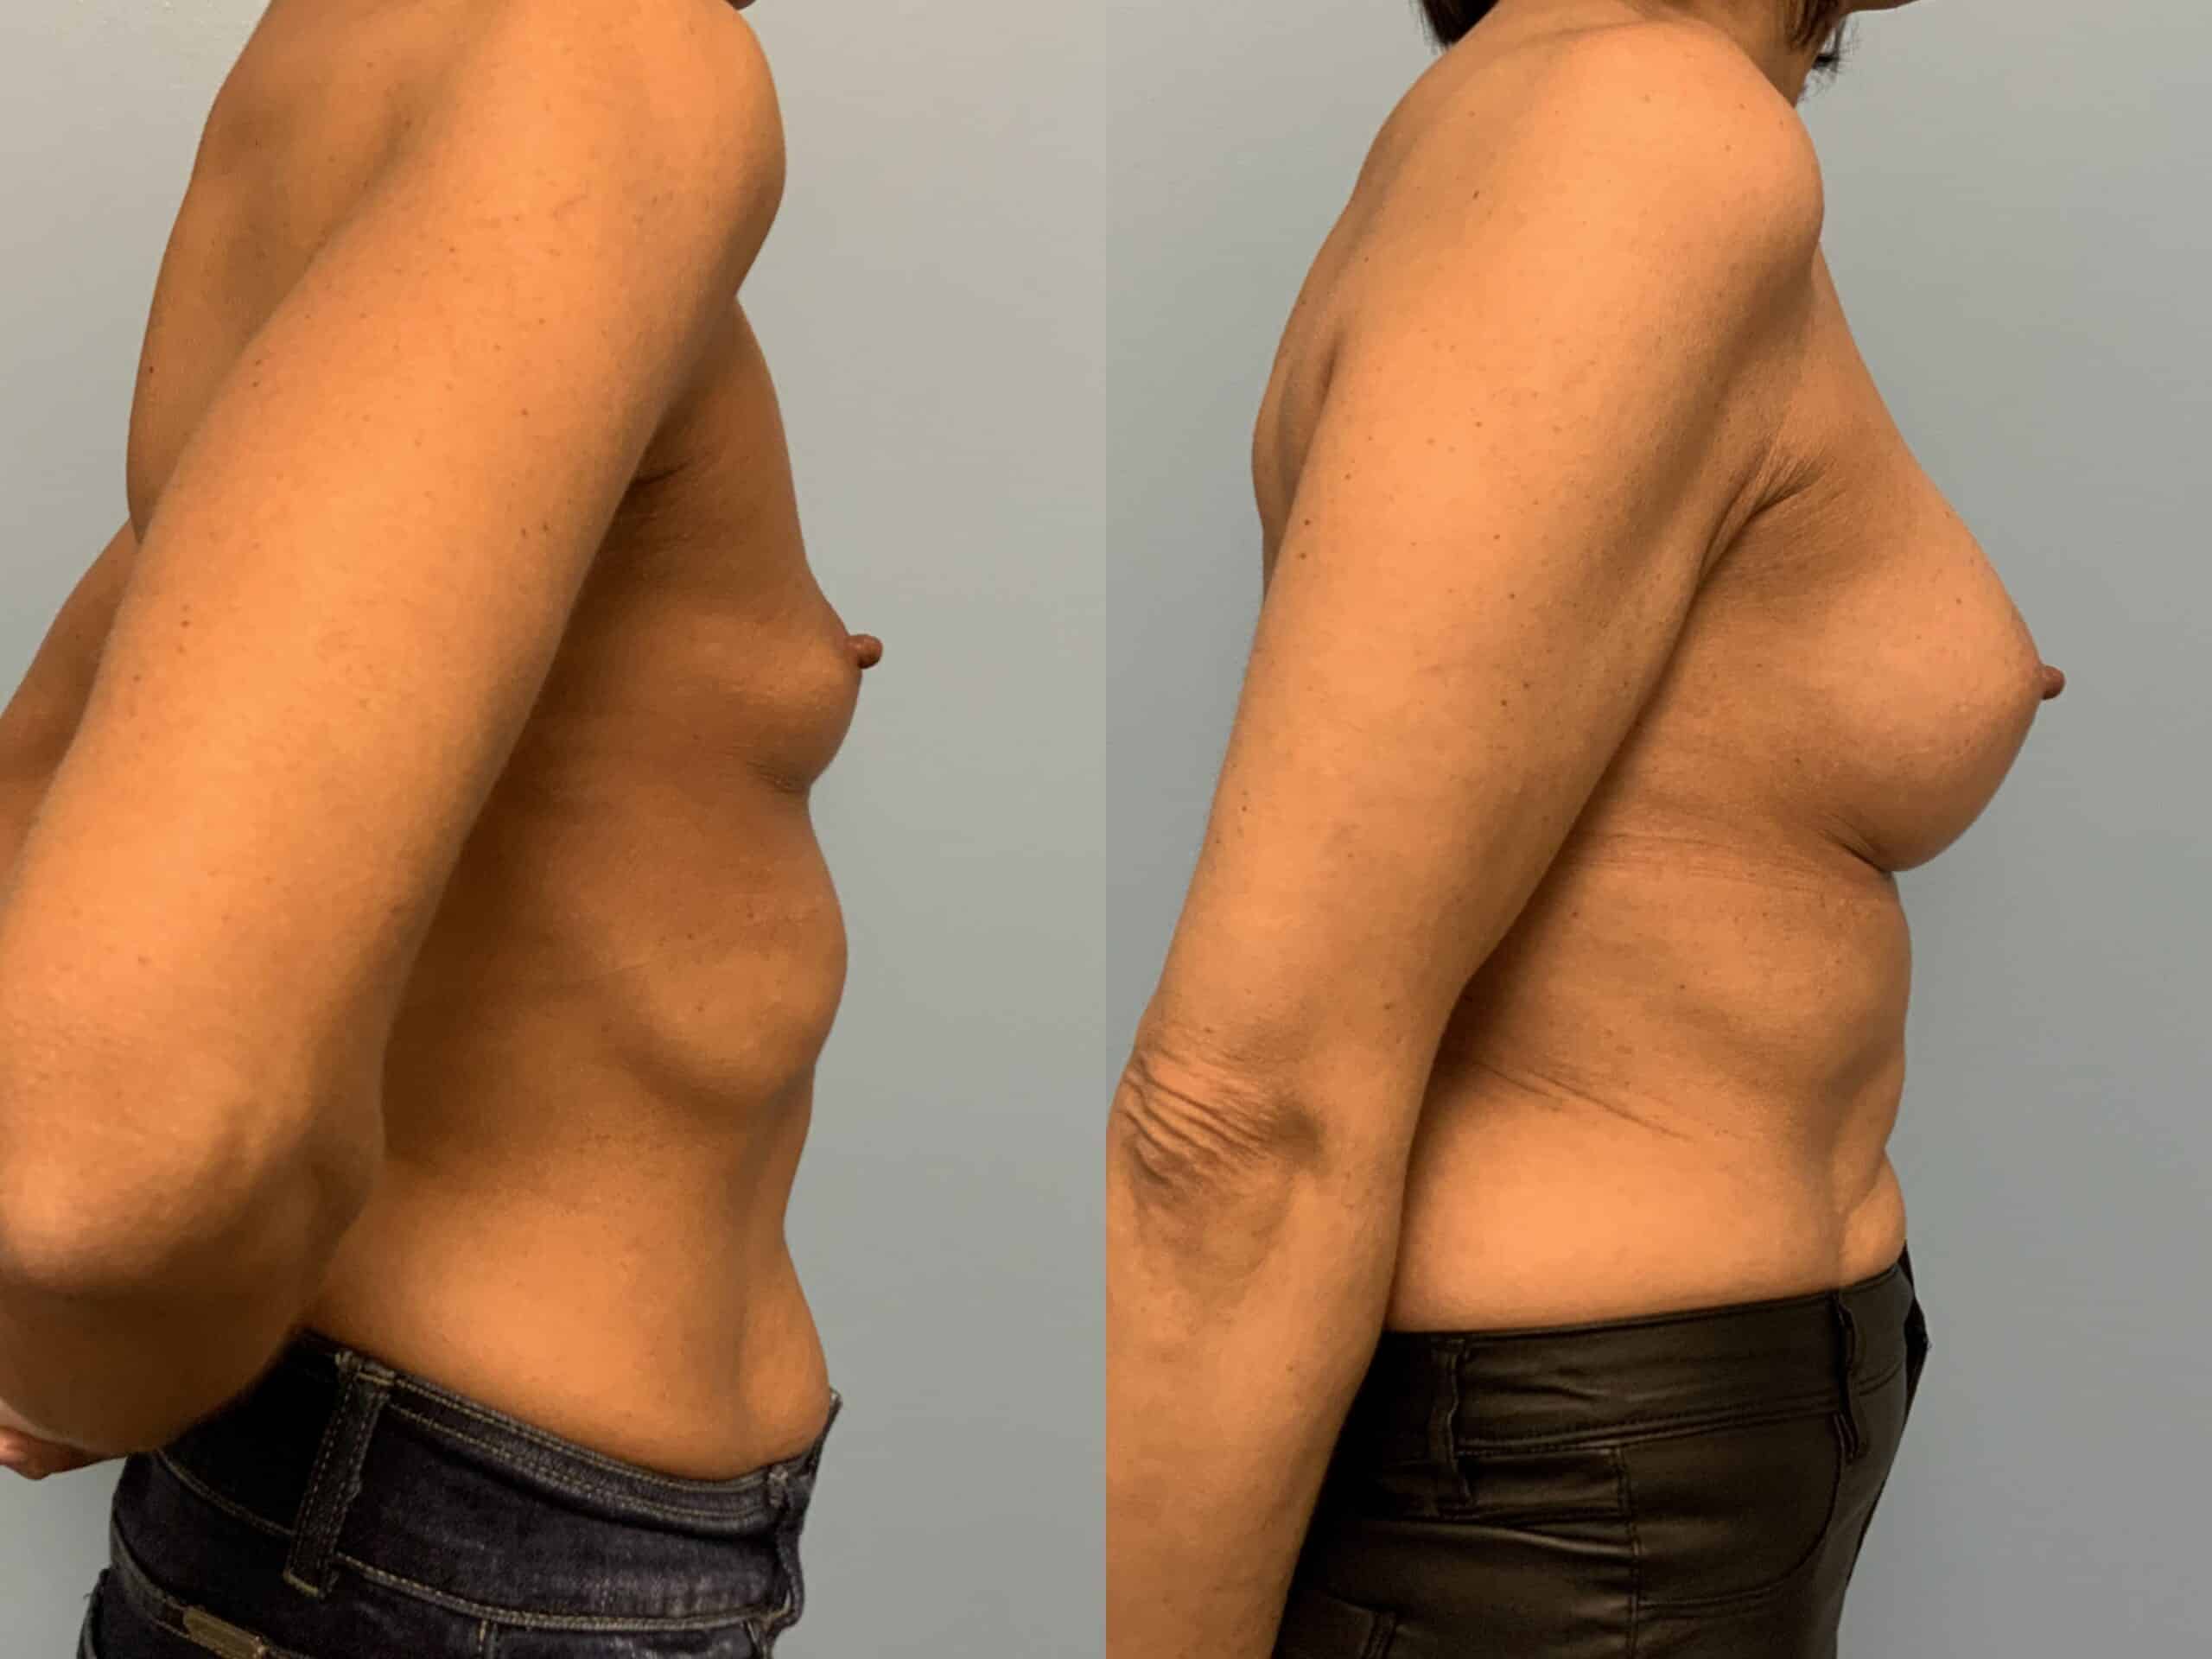 Before and after, Patient 2 mo post op from Breast augmentation, Level III Muscle Release procedure performed by Dr. Paul Vanek